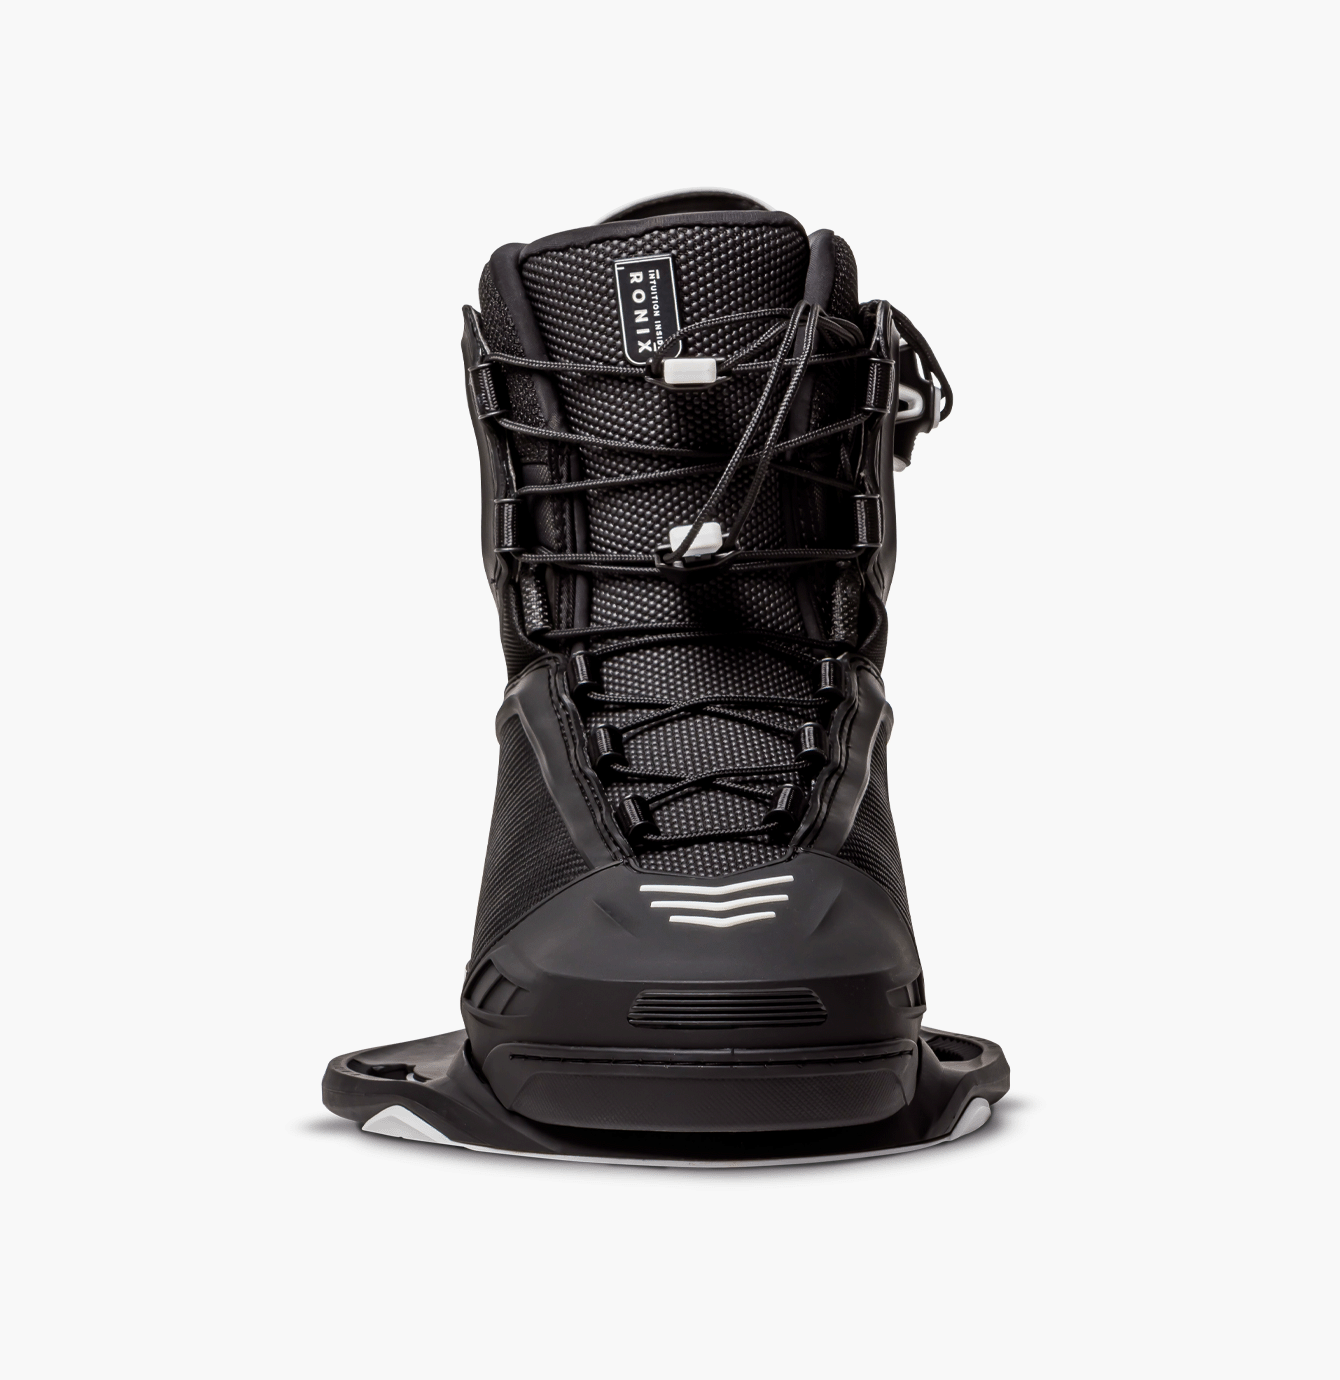 RONIX ONE BOOTS